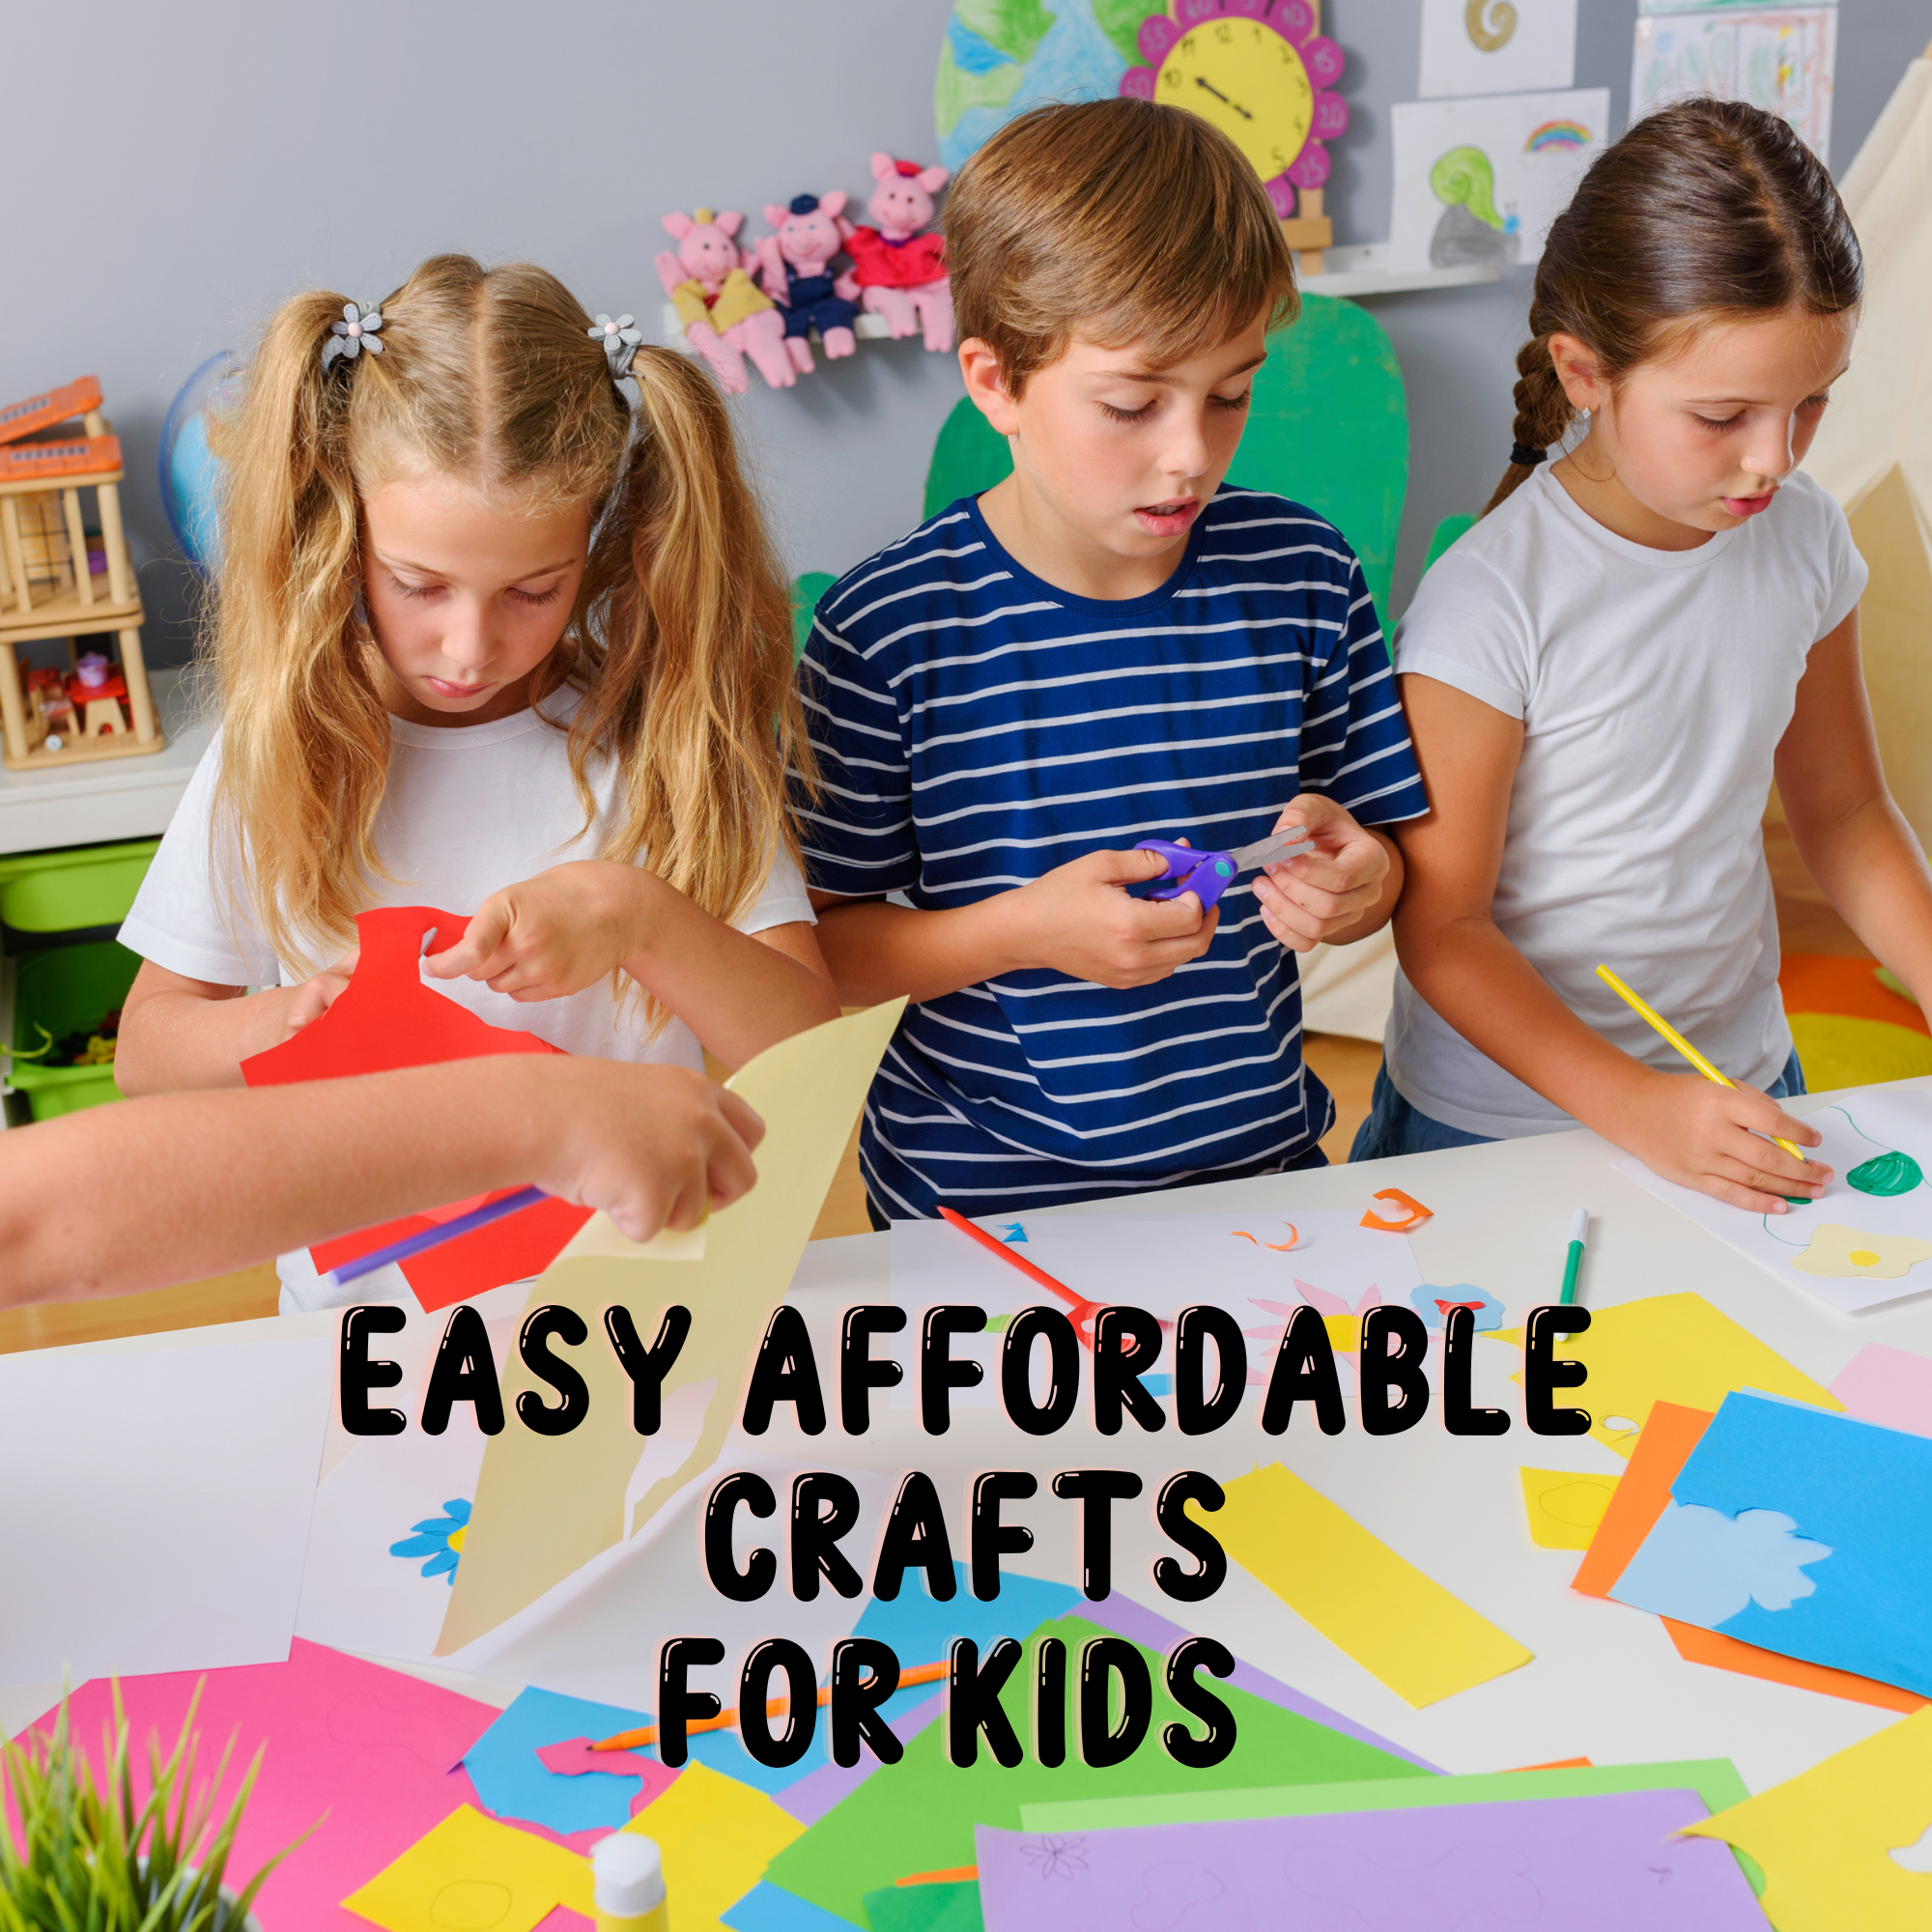 Easy Affordable Crafts For Kids To Make at home